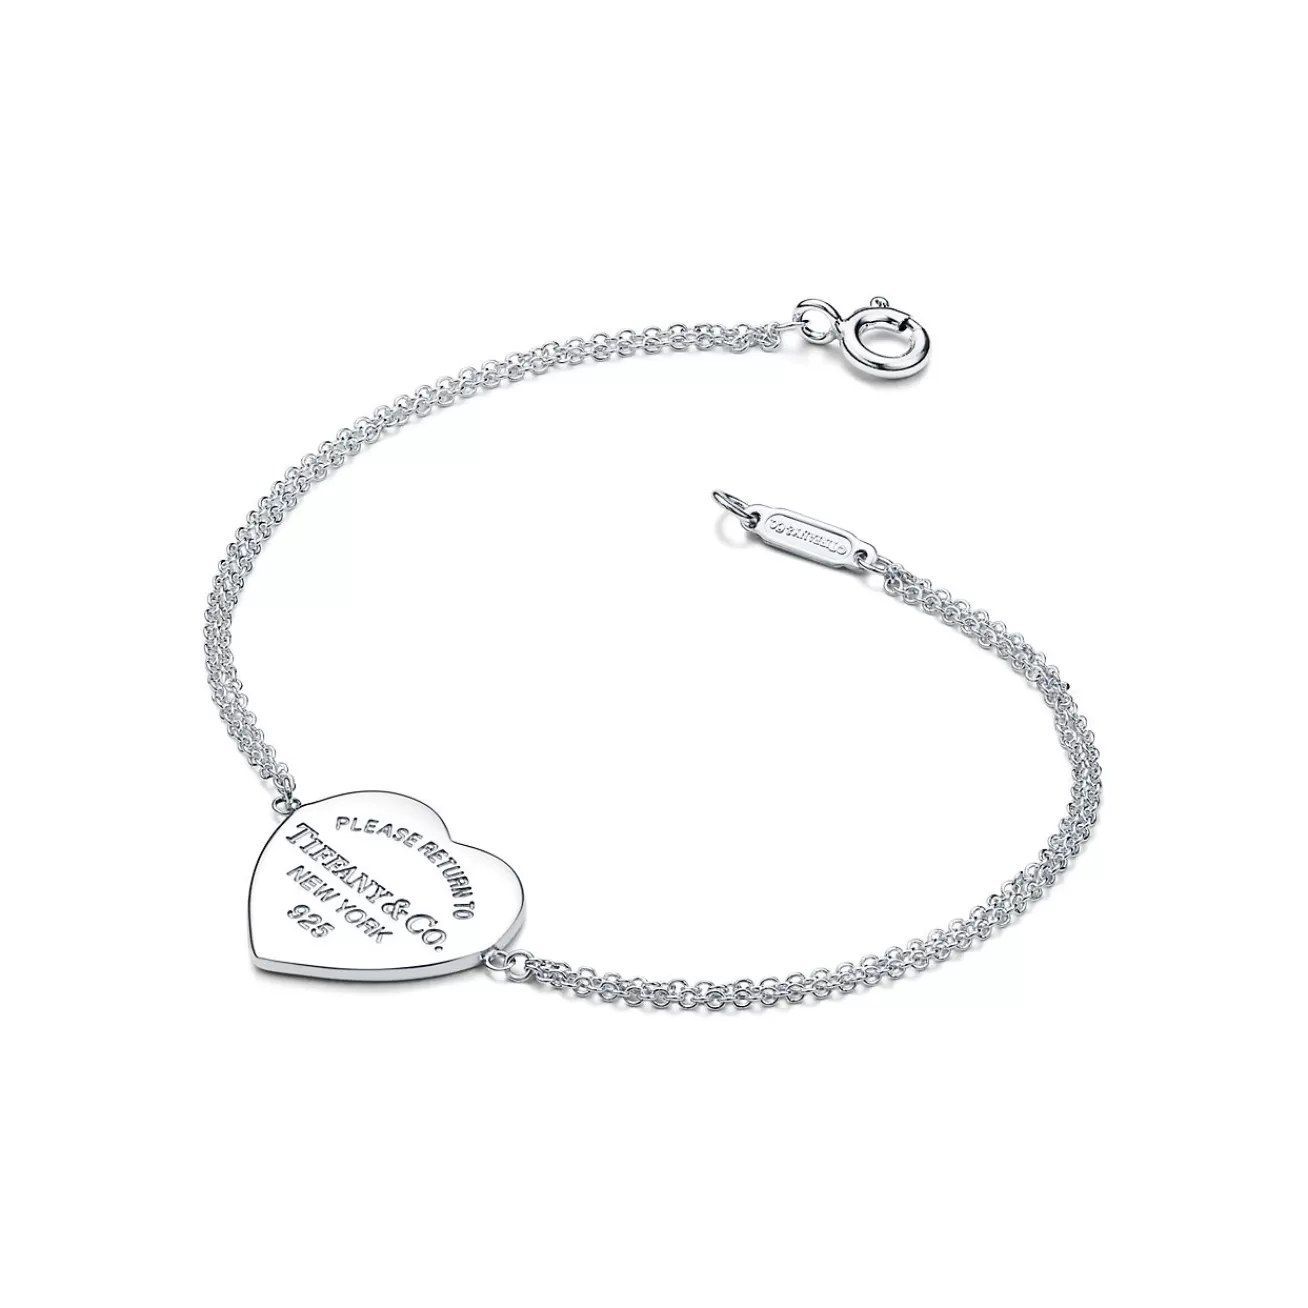 Tiffany & Co. Return to Tiffany® Heart Tag Double Chain Bracelet in Silver, Small | ^ Bracelets | Sterling Silver Jewelry